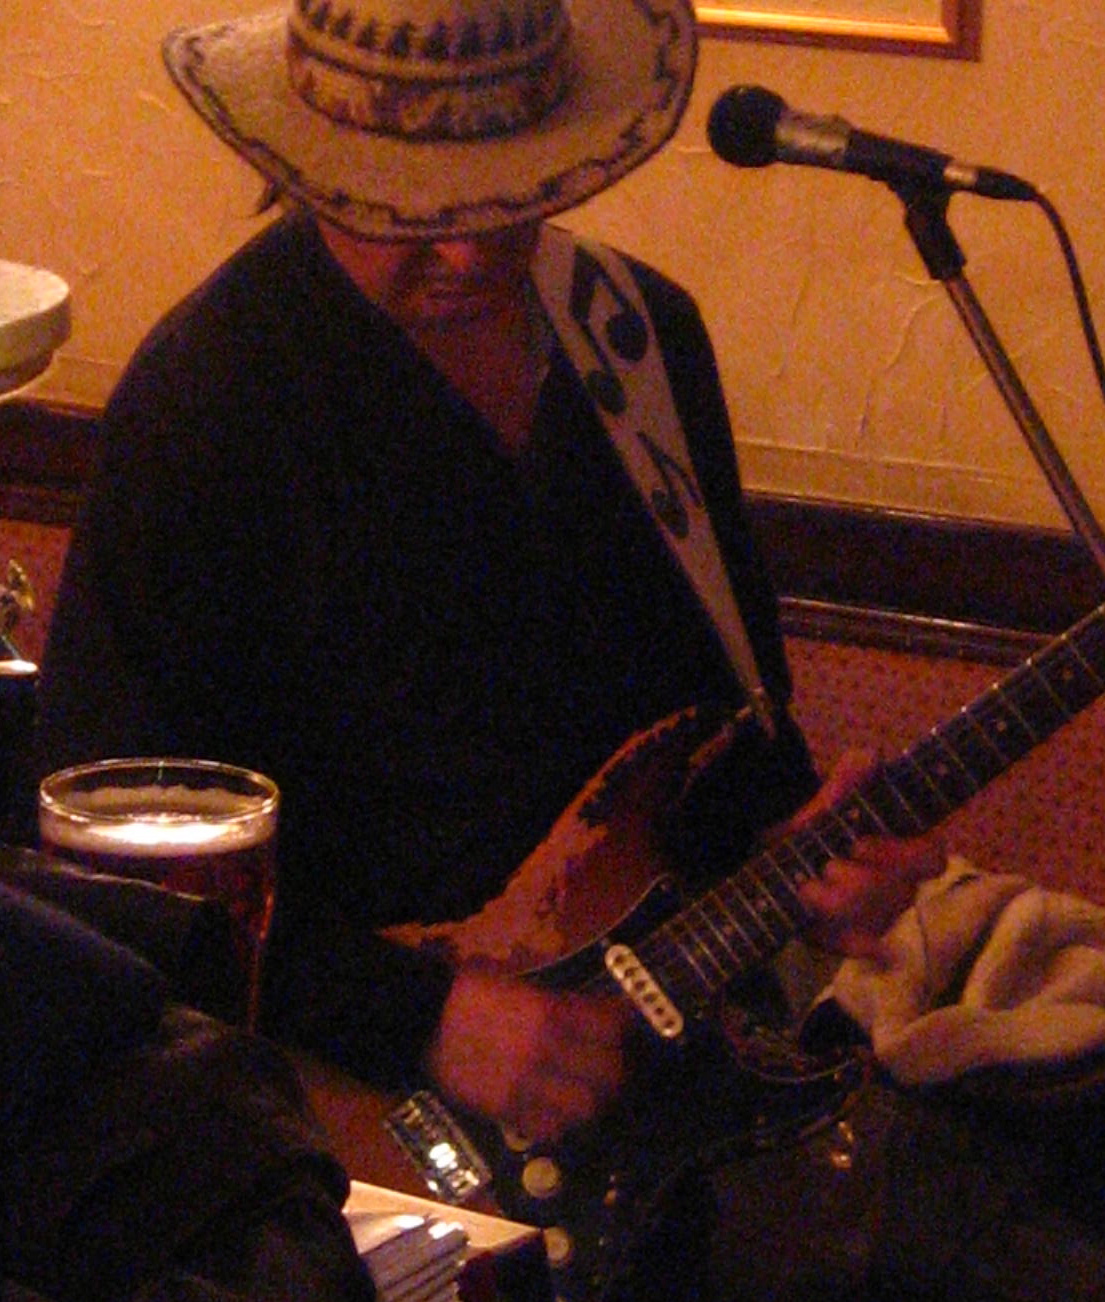 a man in a cowboy hat playing guitar